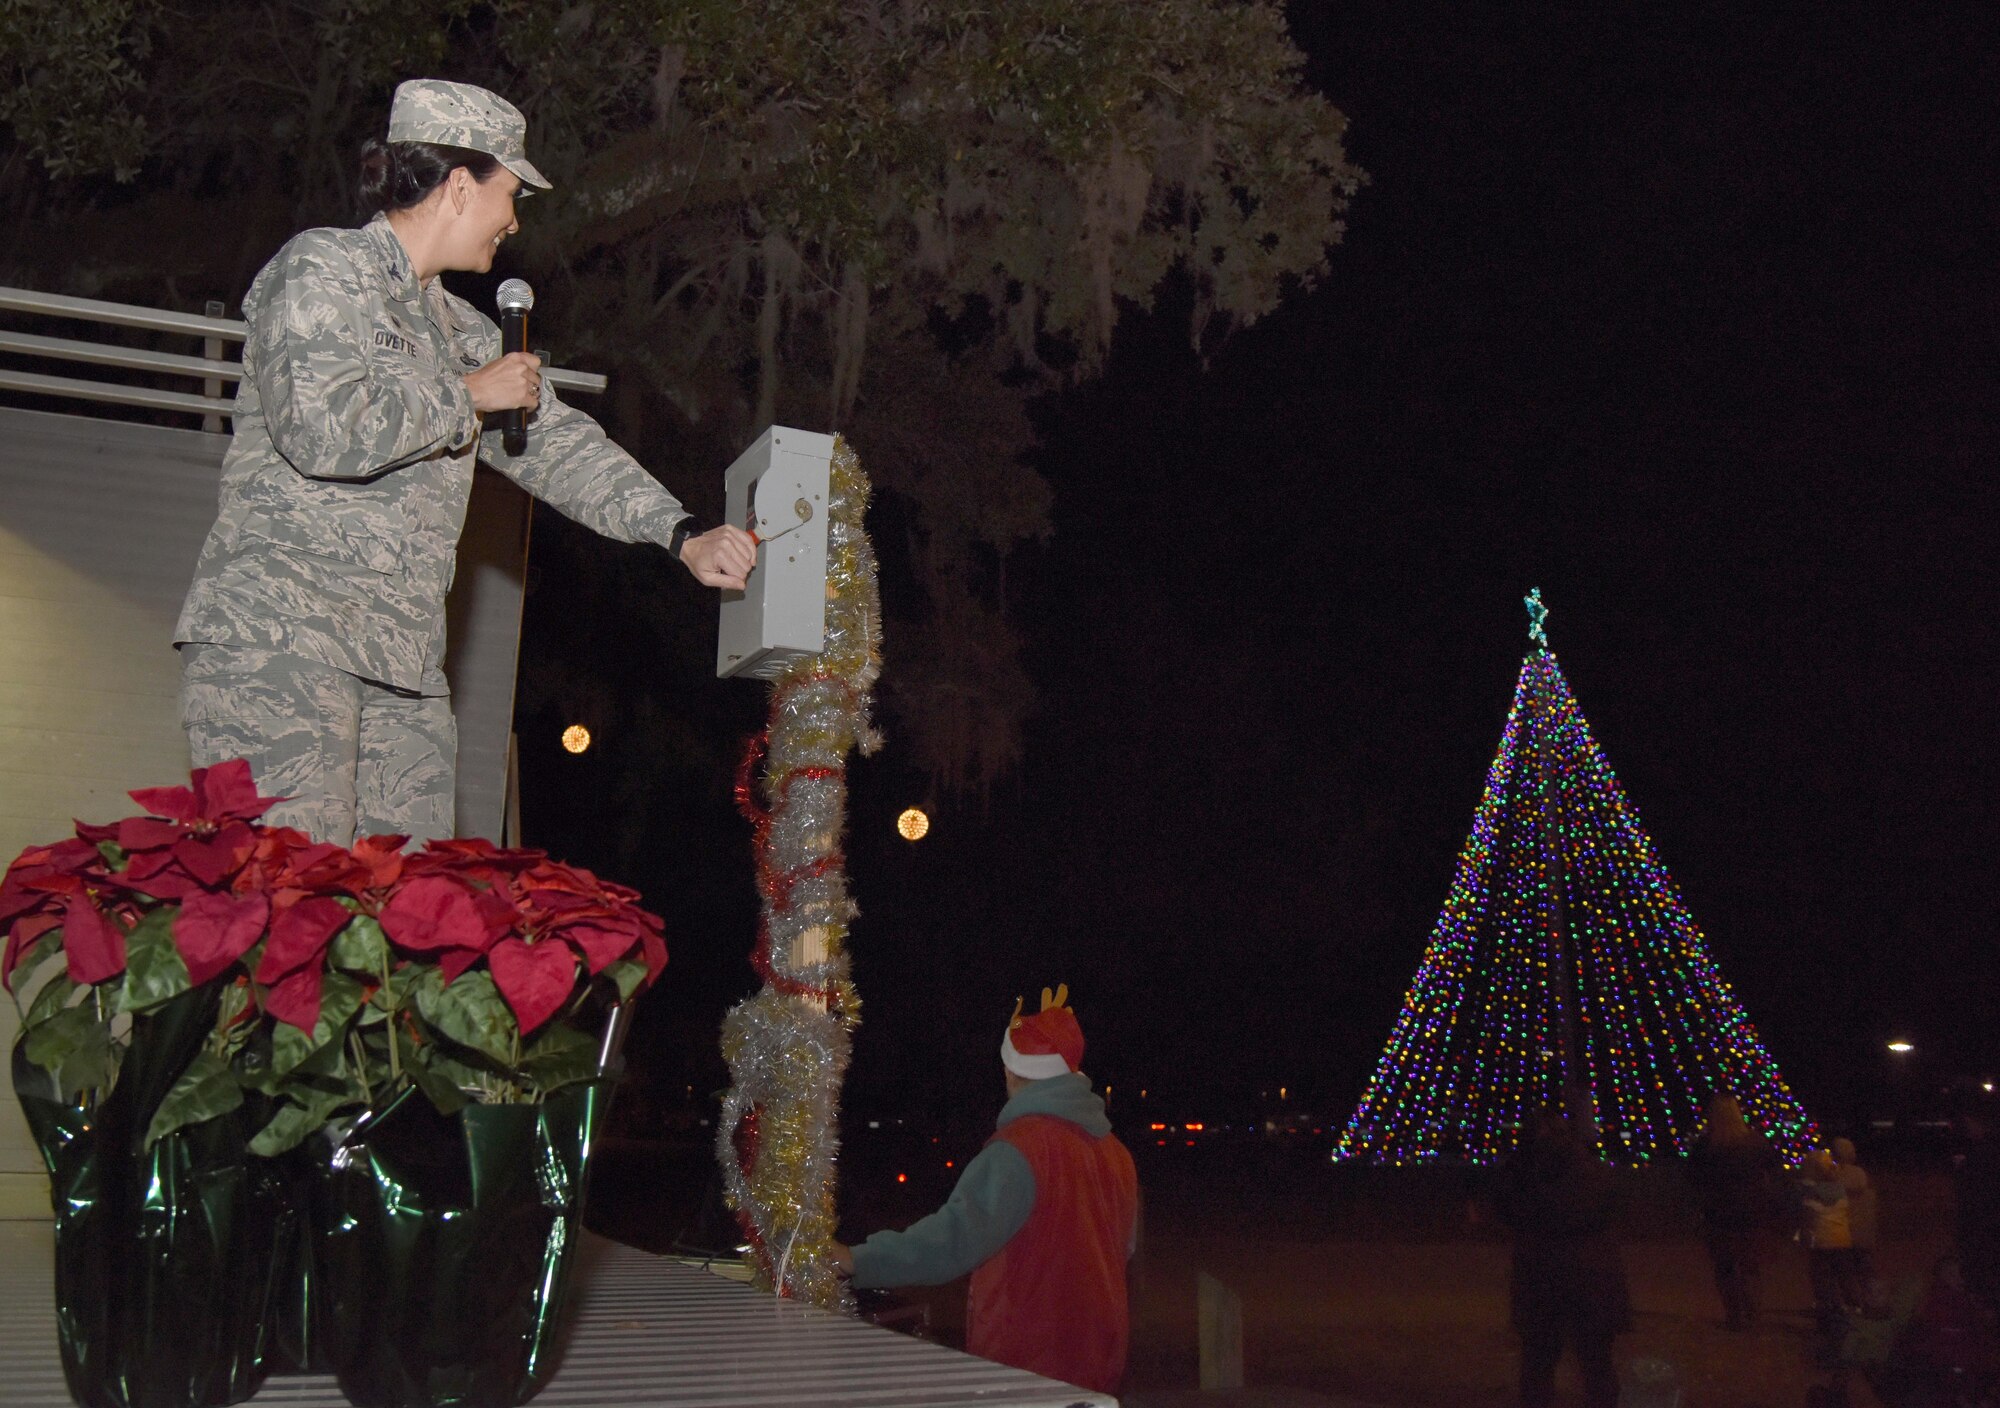 U.S Air Force Col. Debra Lovette, 81st Training Wing commander, turns on the lights during a Christmas tree lighting ceremony at Christmas in the Park on Keesler Air Force Base, Mississippi, Dec. 6, 2018. The event hosted by Outdoor Recreation included cookie and ornament decorating, games and visits with Santa. (U.S. Air Force photo by Kemberly Groue)